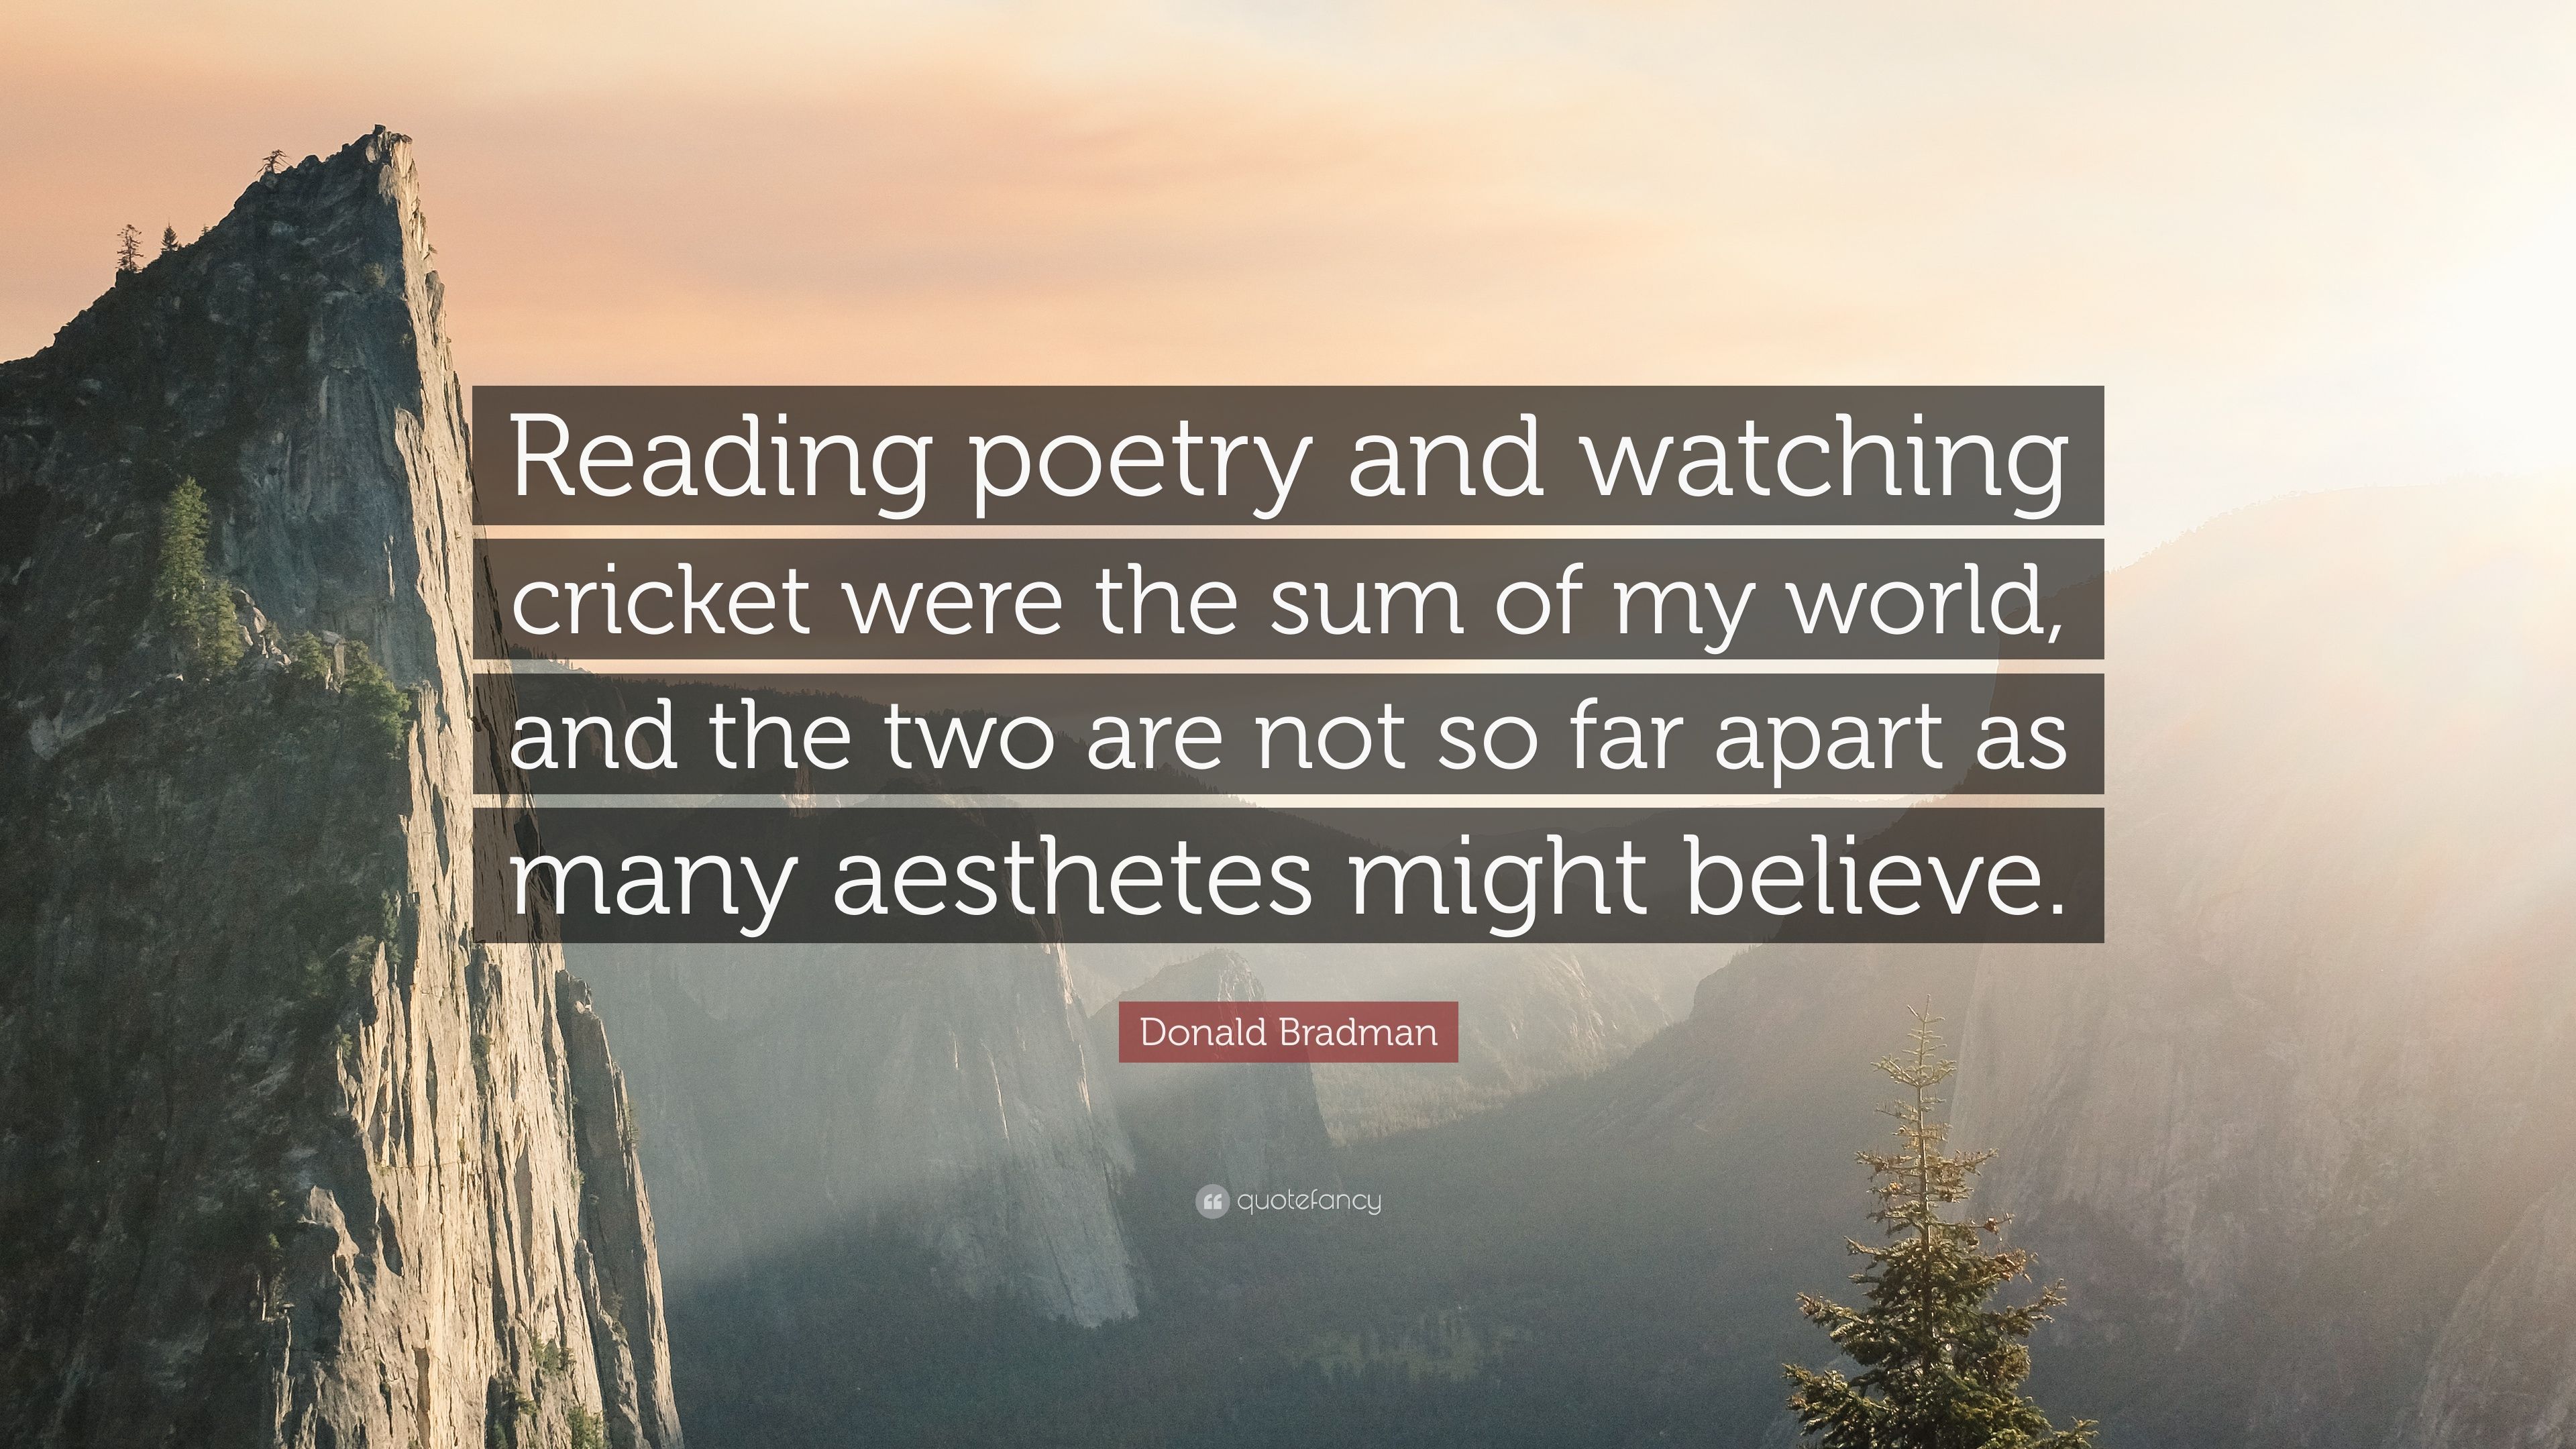 Donald Bradman Quote: "Reading poetry and watching cricket were the su...